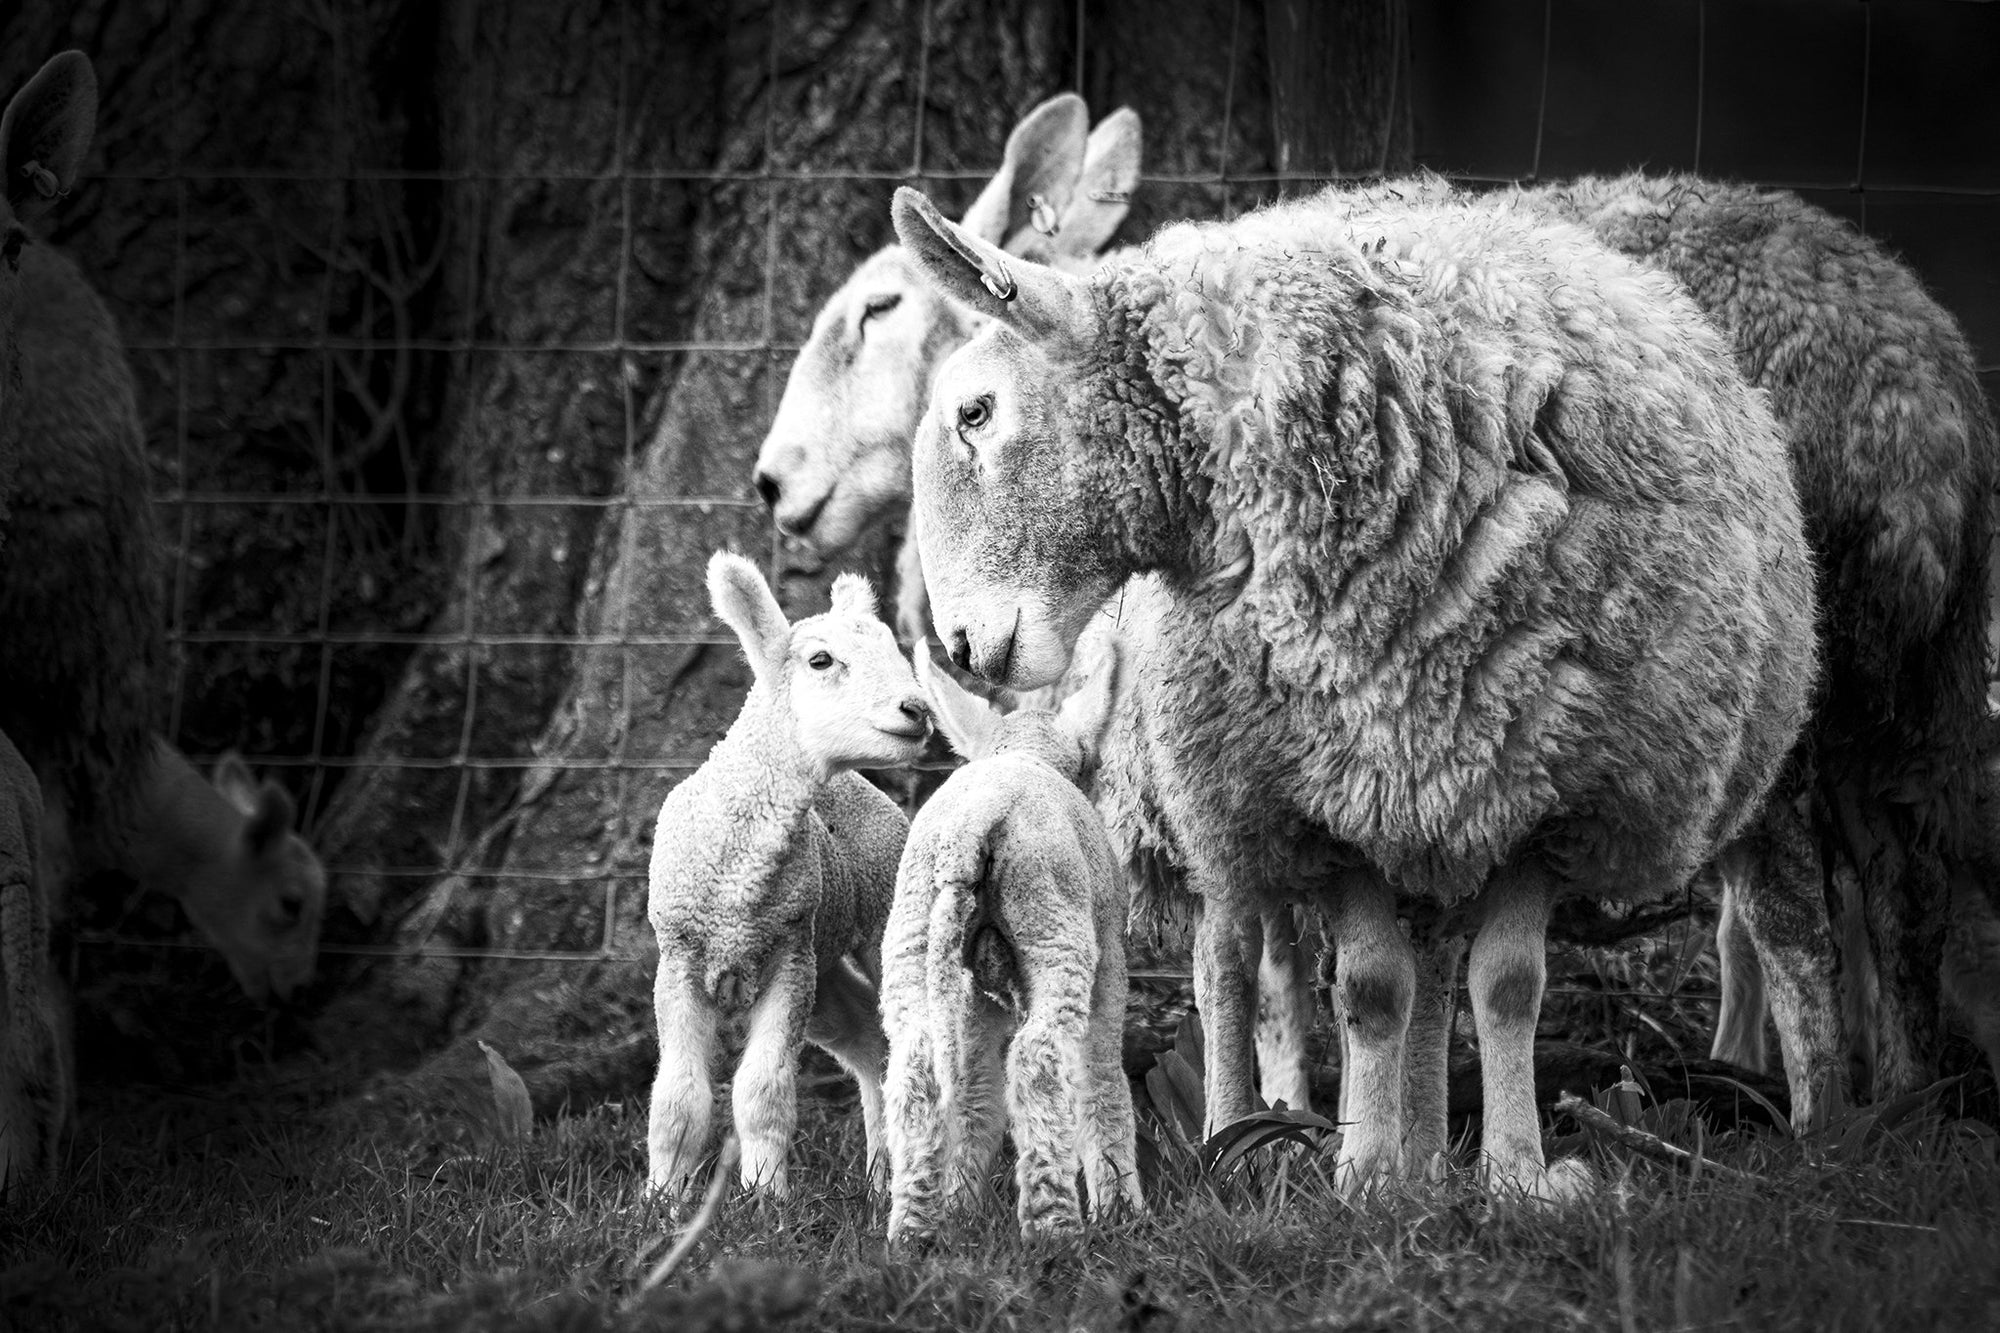 Lambs being Nurtured by their Mothers